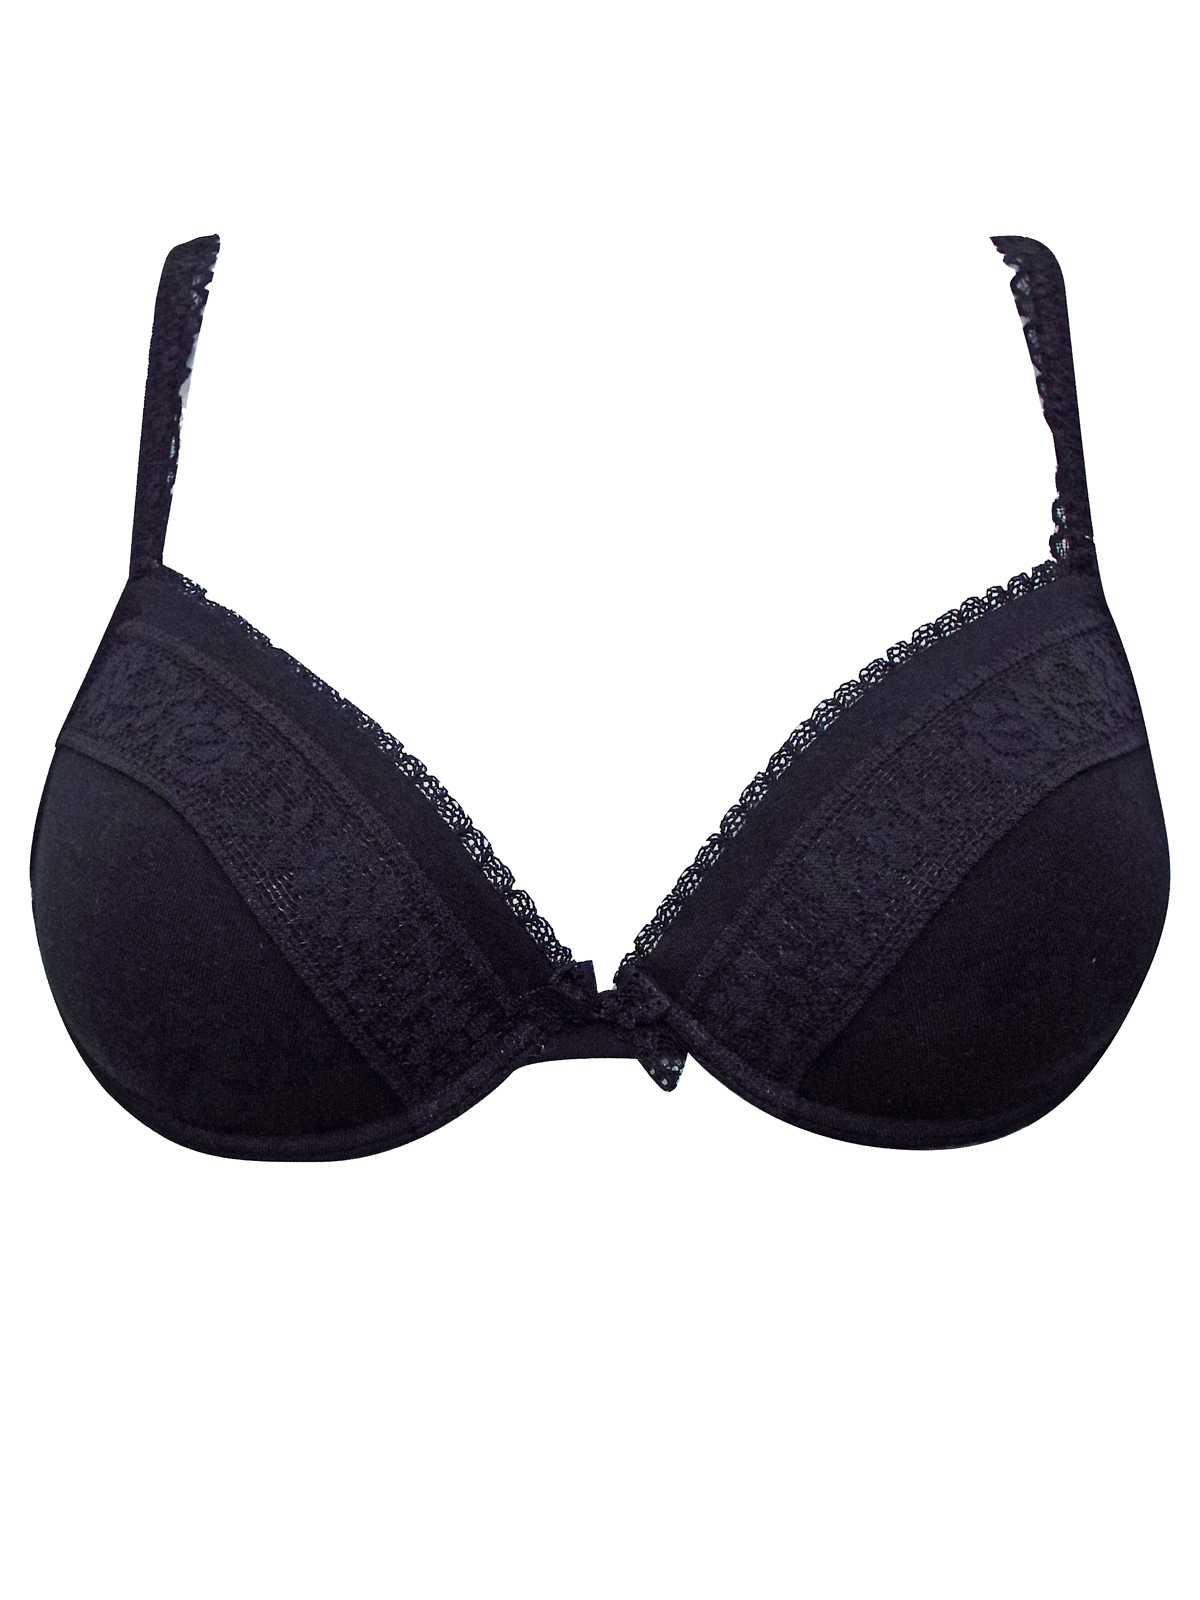 Marks and Spencer - - M&5 BLACK Lace Panel Underwired Full Cup Bra ...